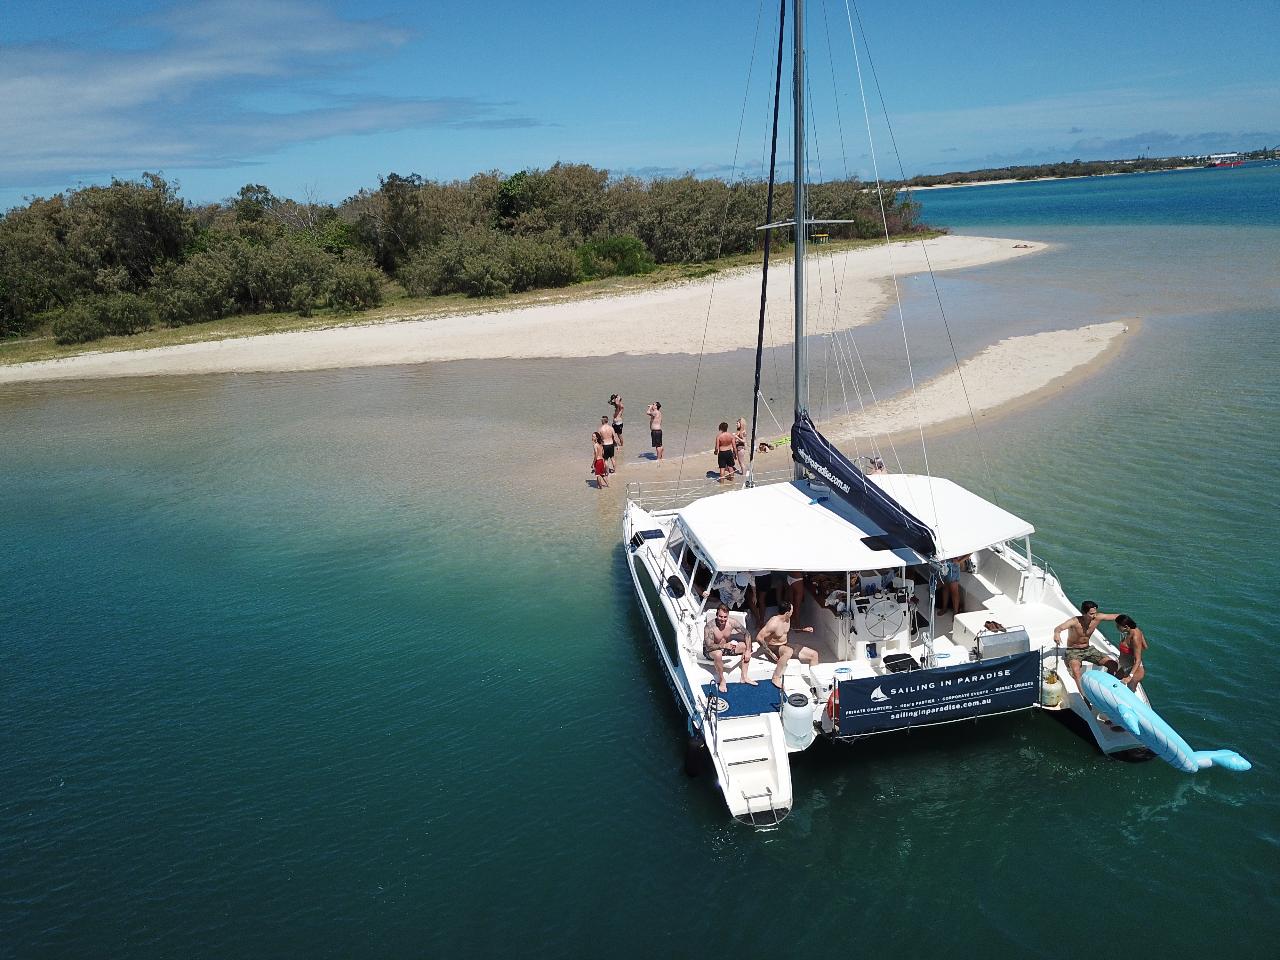 Half Day Christmas Party Charter on 'Spirit of Gwonda' (up to 30 guests)